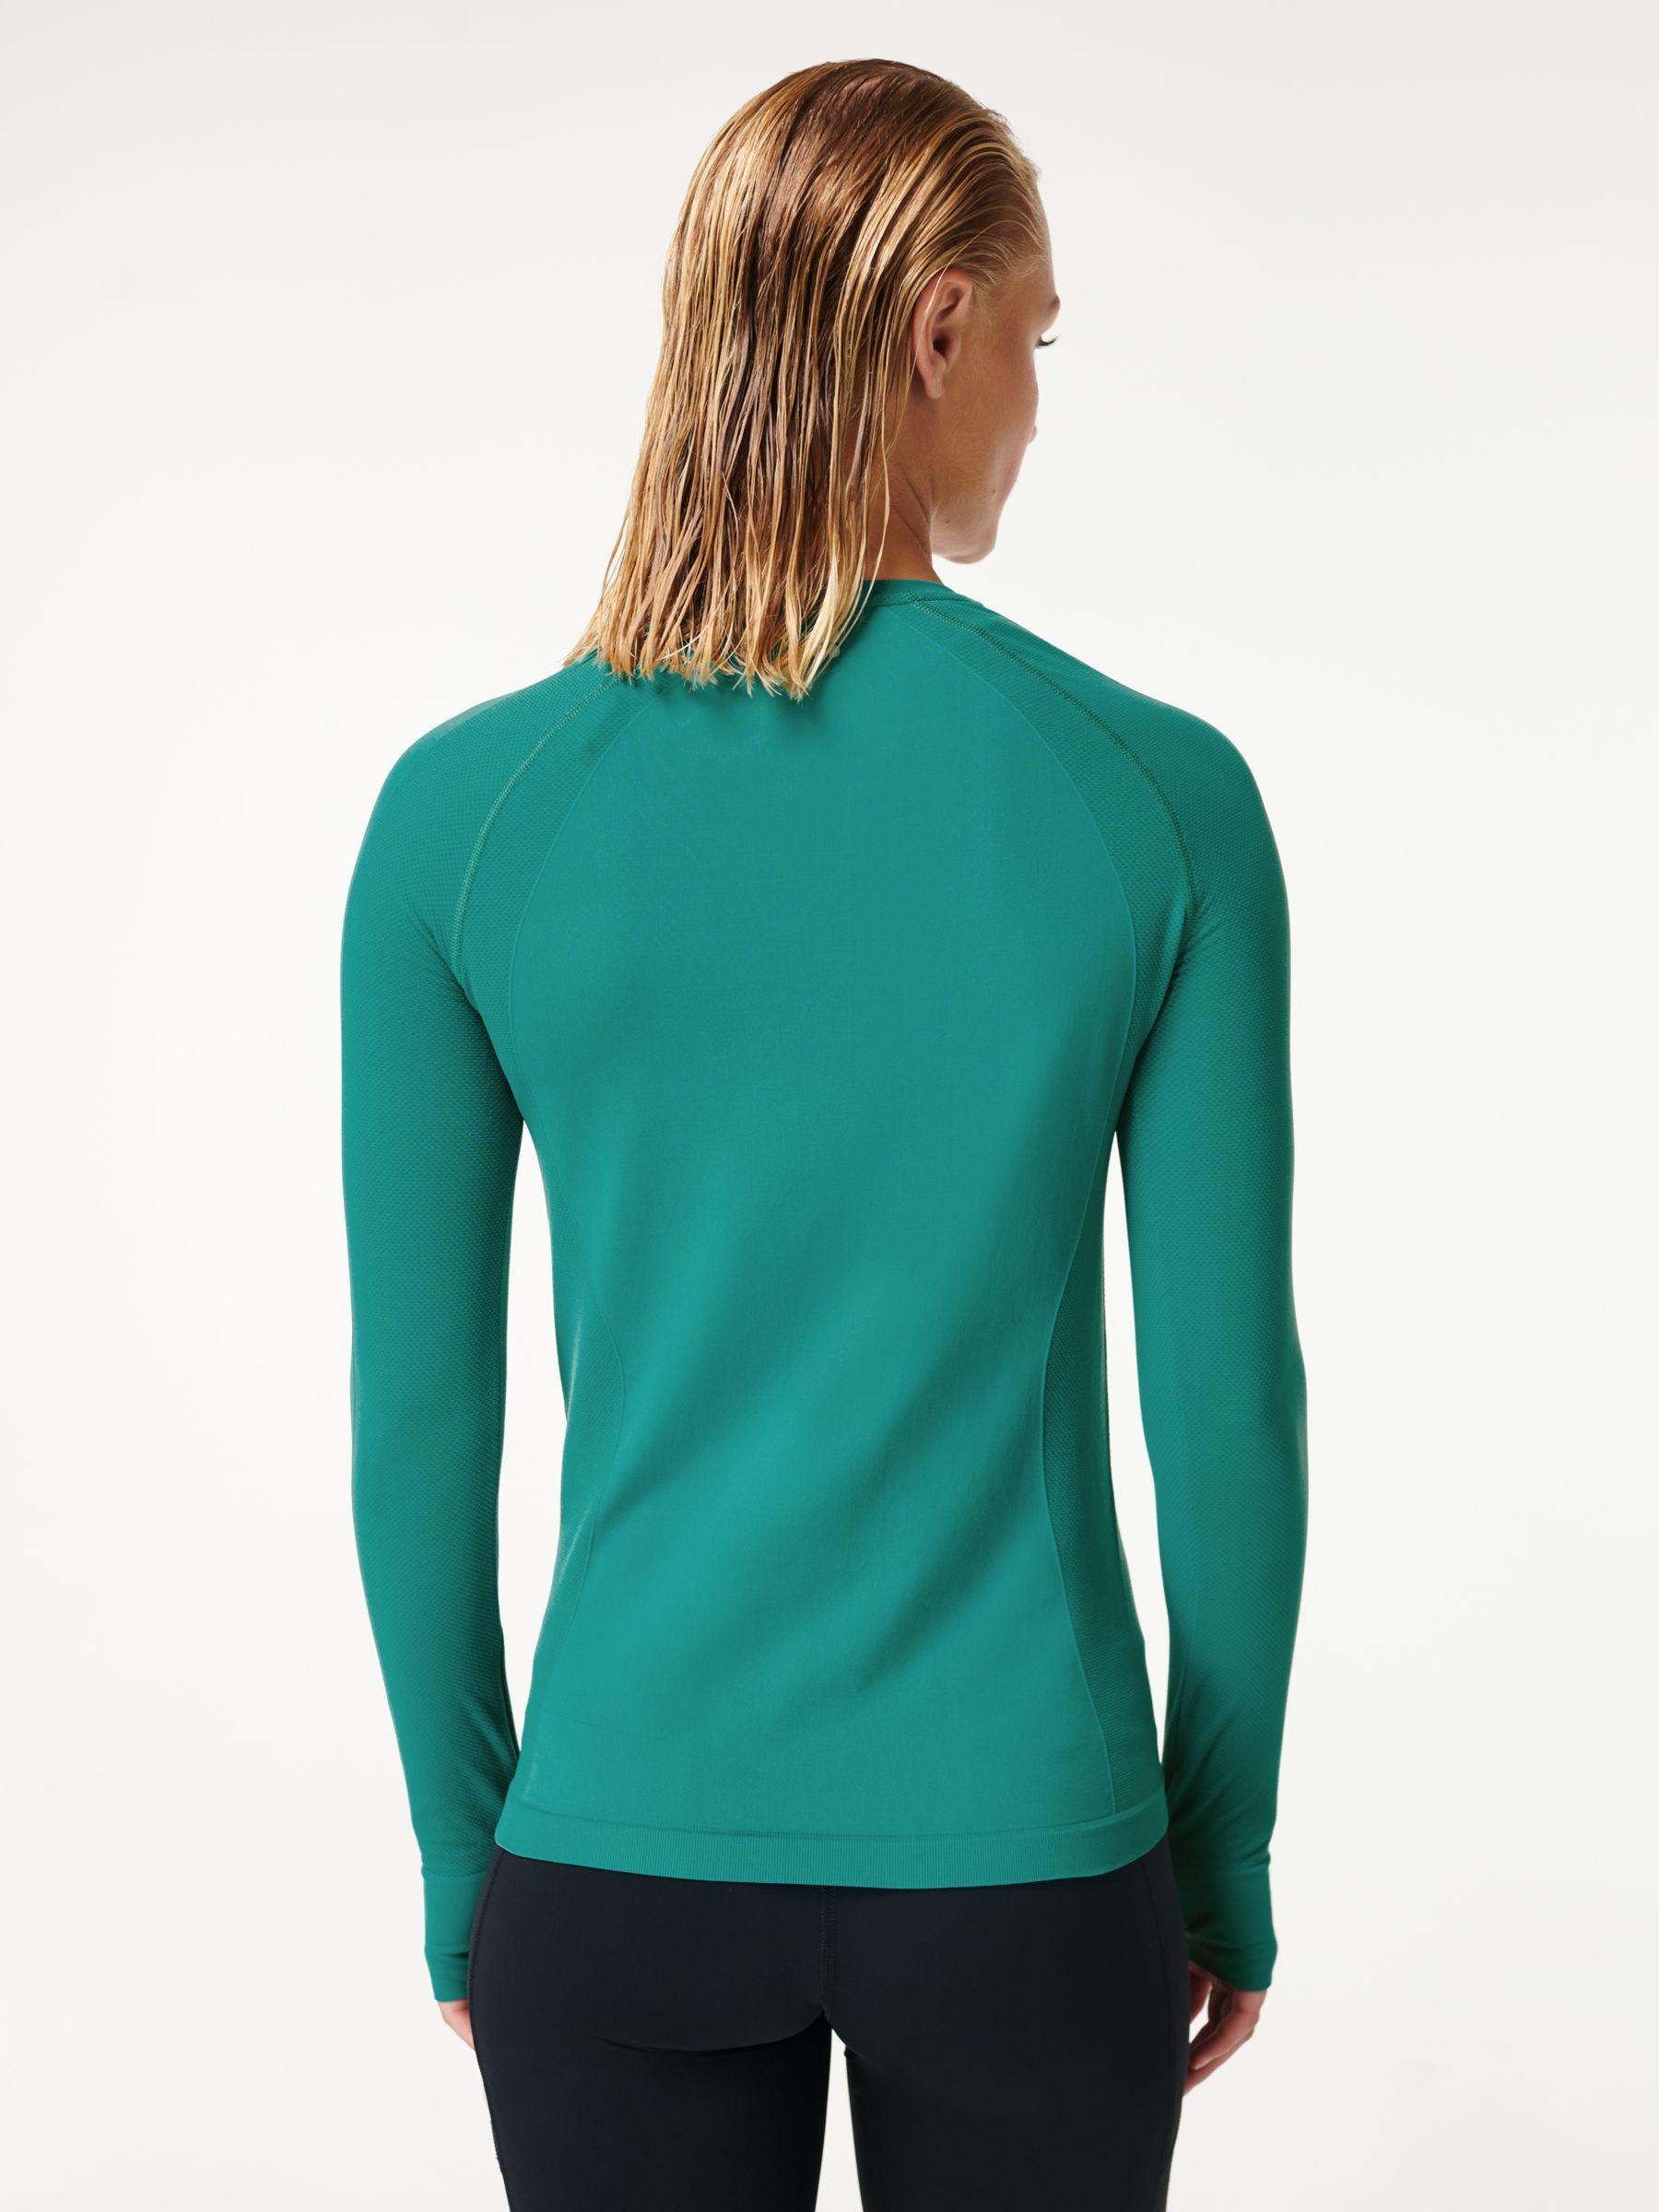 Sweaty Betty Athlete Seamless Workout Long Sleeve Top in Green